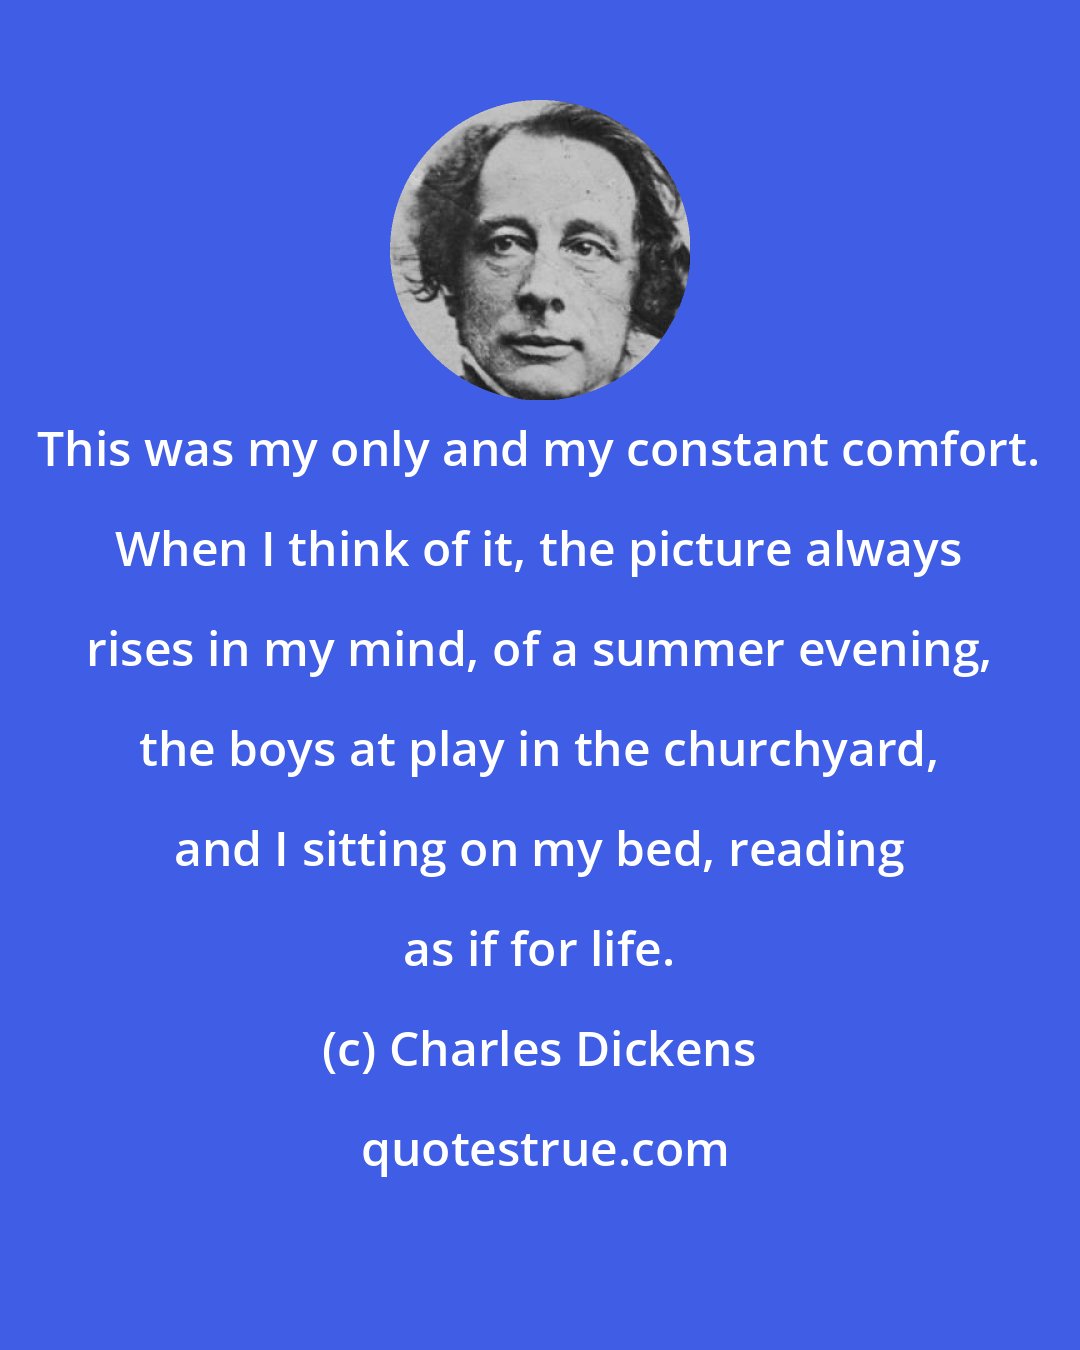 Charles Dickens: This was my only and my constant comfort. When I think of it, the picture always rises in my mind, of a summer evening, the boys at play in the churchyard, and I sitting on my bed, reading as if for life.